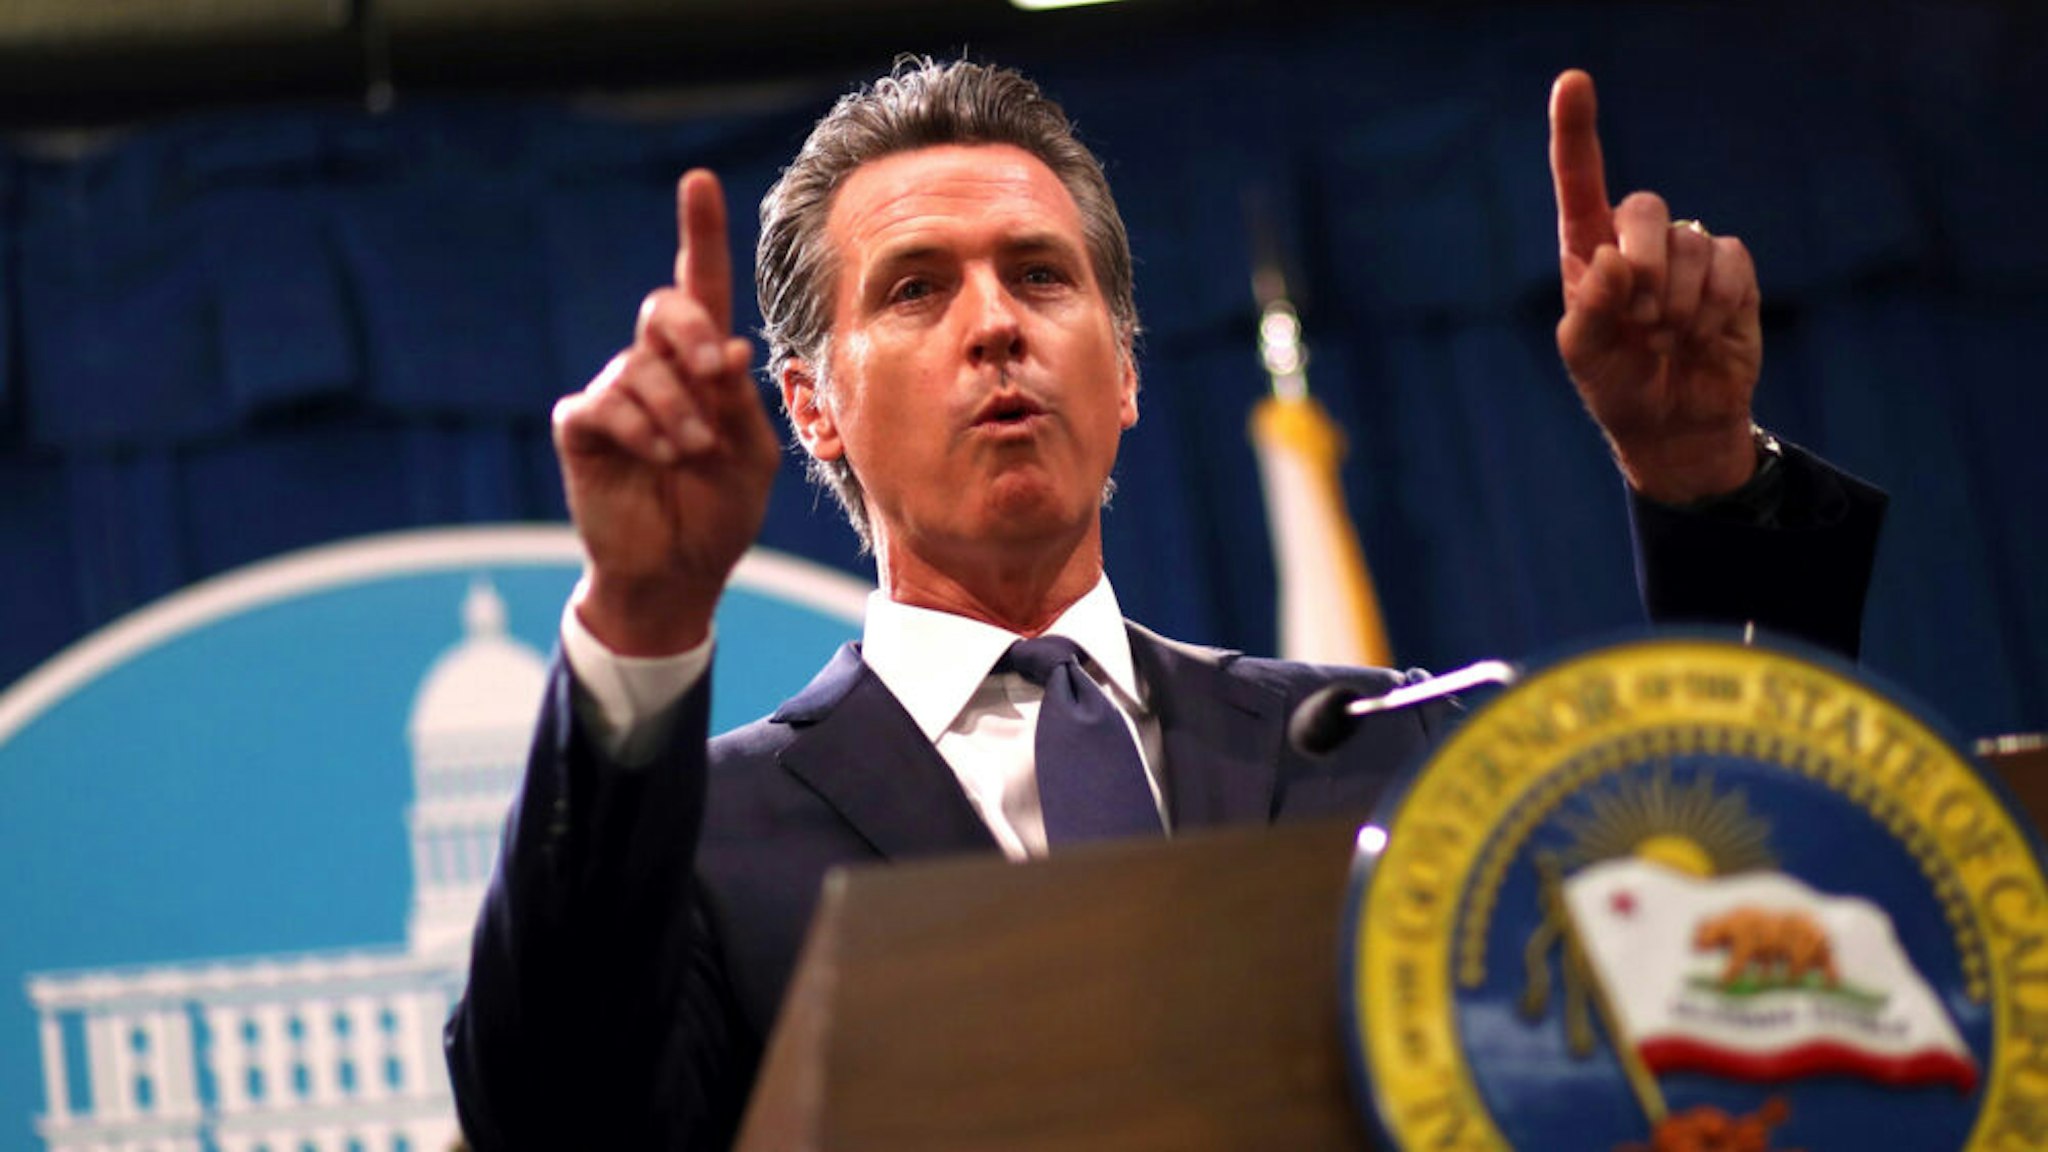 California Gov. Gavin Newsom speaks during a news conference with California attorney General Xavier Becerra at the California State Capitol on August 16, 2019 in Sacramento, California. California attorney genera Xavier Becerra and California Gov. Gavin Newsom announced that the State of California is suing the Trump administration challenging the legality of a new "public charge" rule that would make it difficult for immigrants to obtain green cards who receive public assistance like food stamps and Medicaid.